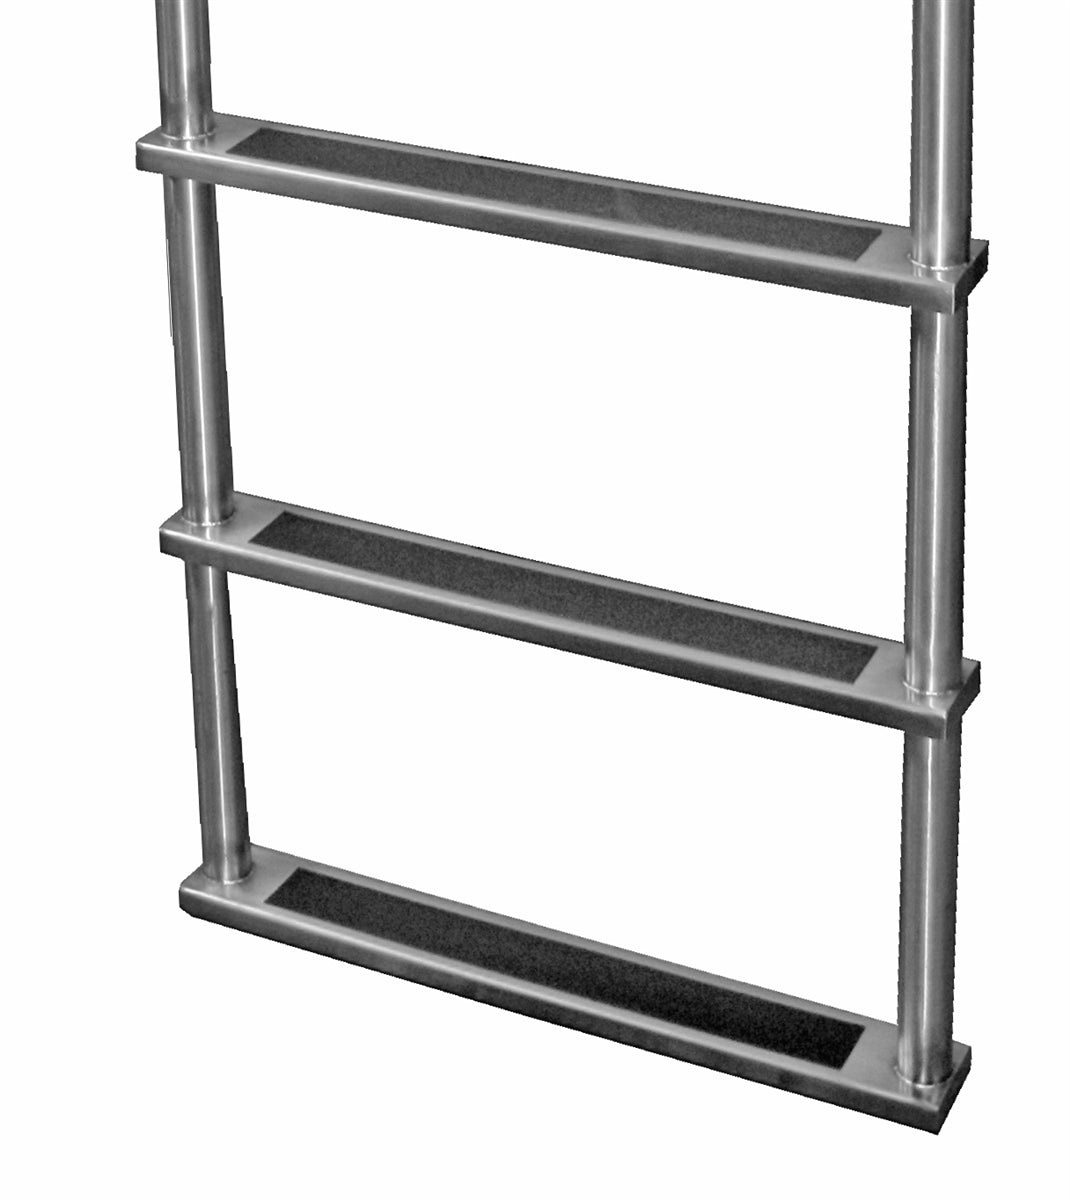 L-1212-LB Four-Step Stainless Steel Dock Ladder, Front Mount with Detachable Mounting Flanges - 8" Handles